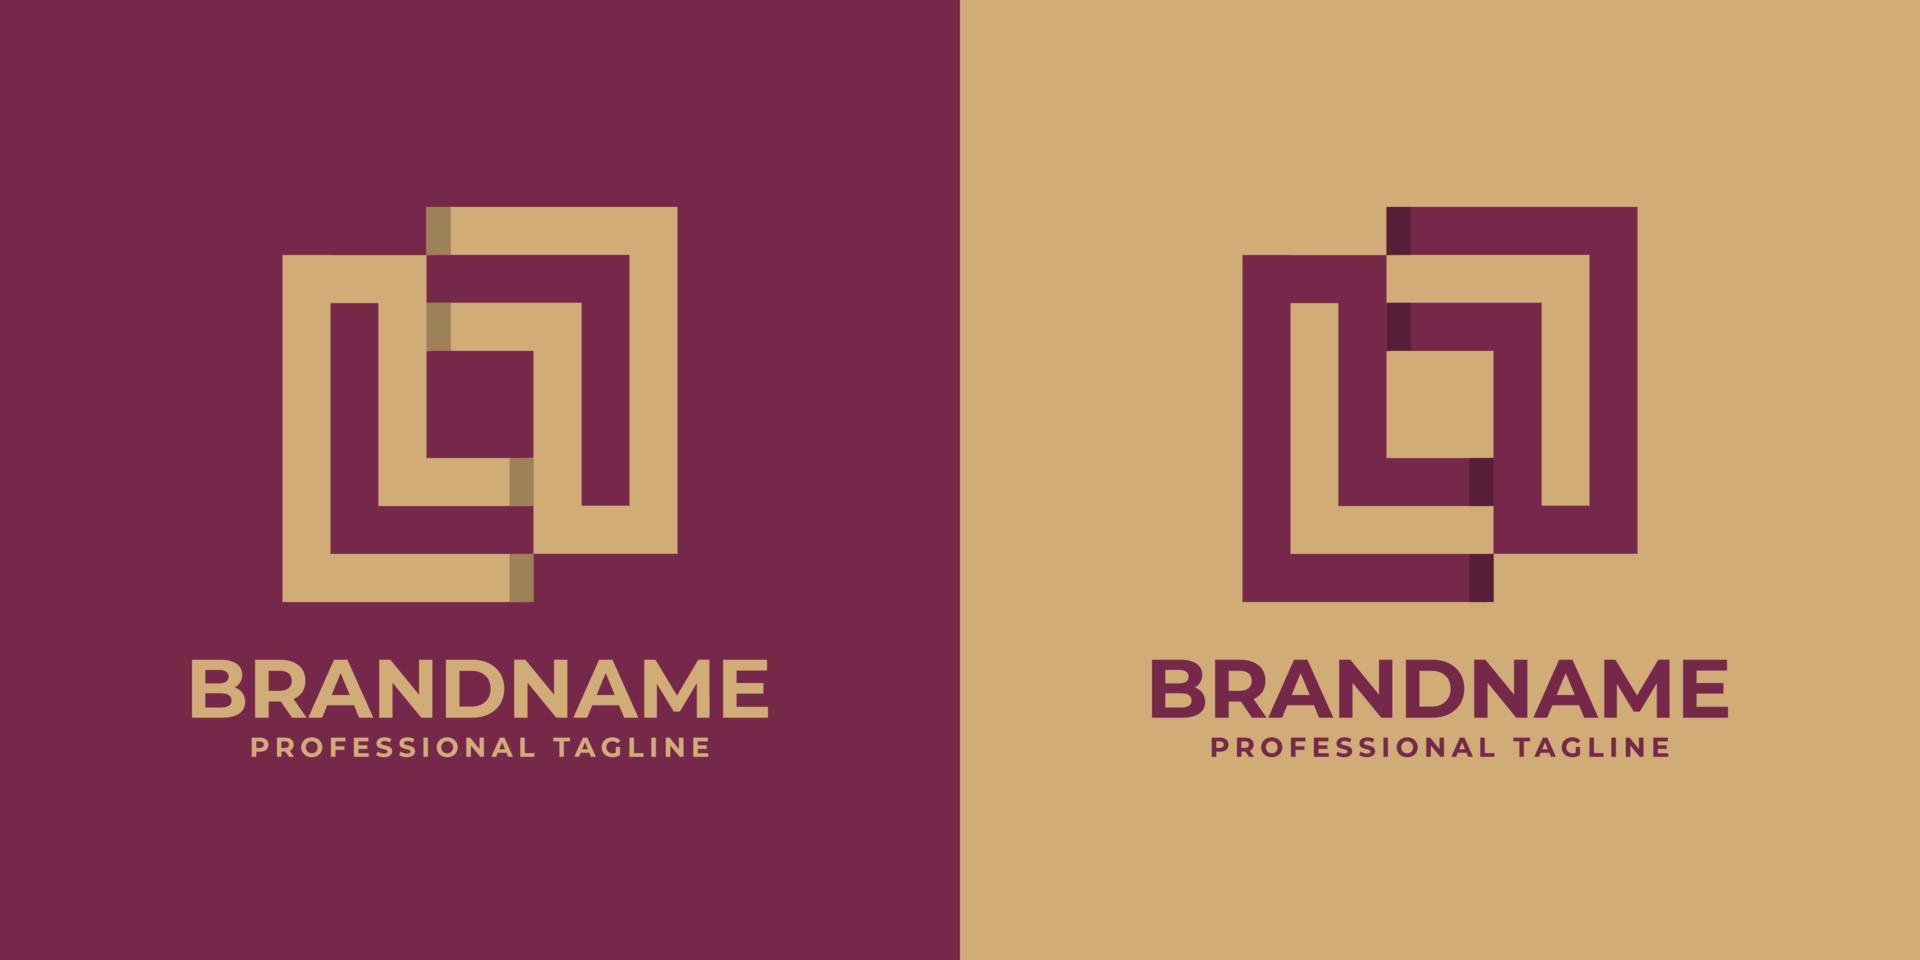 Simple LL Monogram Logo, suitable for any business with L or LL initials. vector